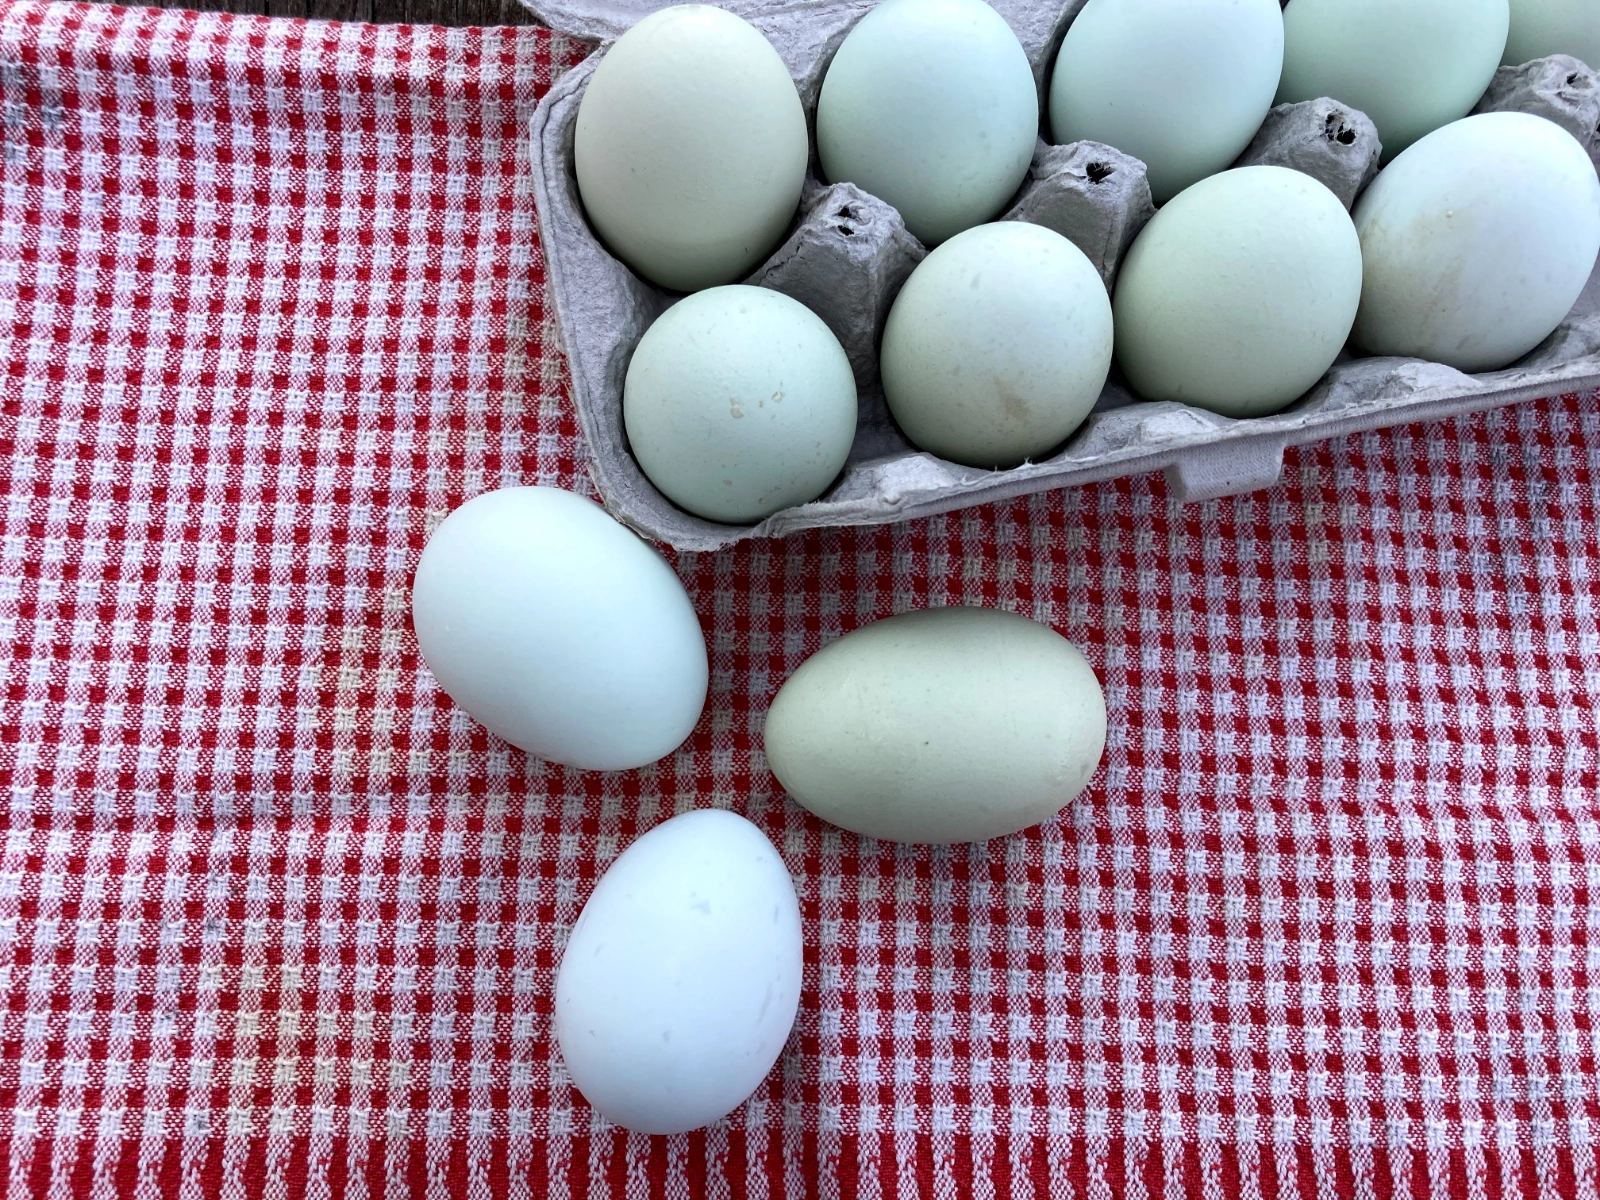 soy-free-gmo-free-pasture-raised-multicolored-eggs-from-heritage-breed-chickens